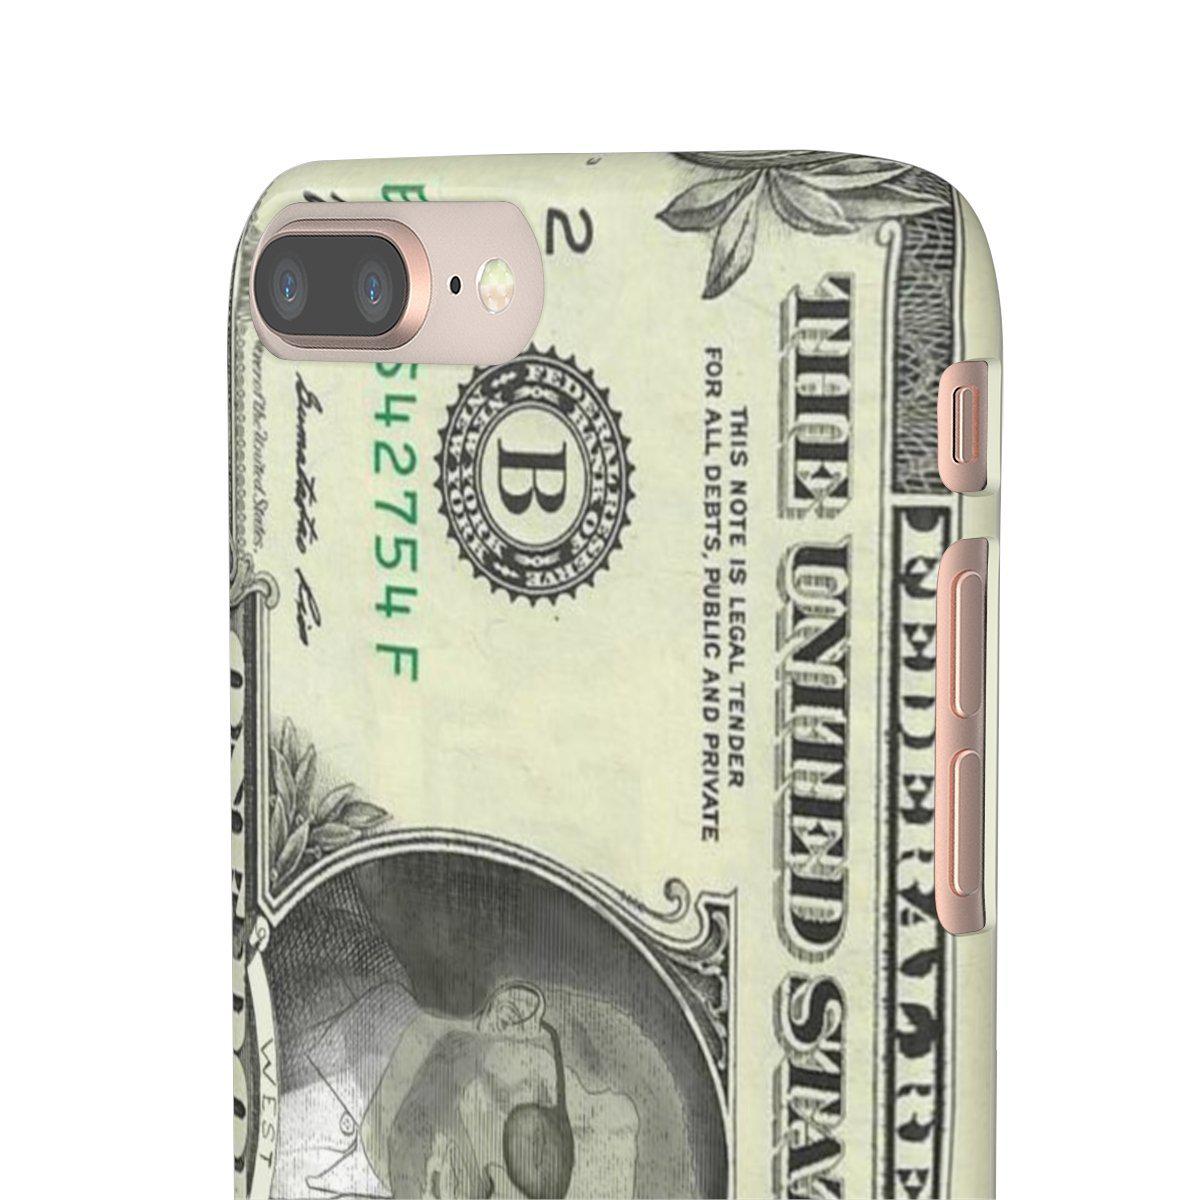 Kanye West President face on 1 dollar bill case iPhone Snap Case-iPhone 8 Plus-Glossy-Archethype